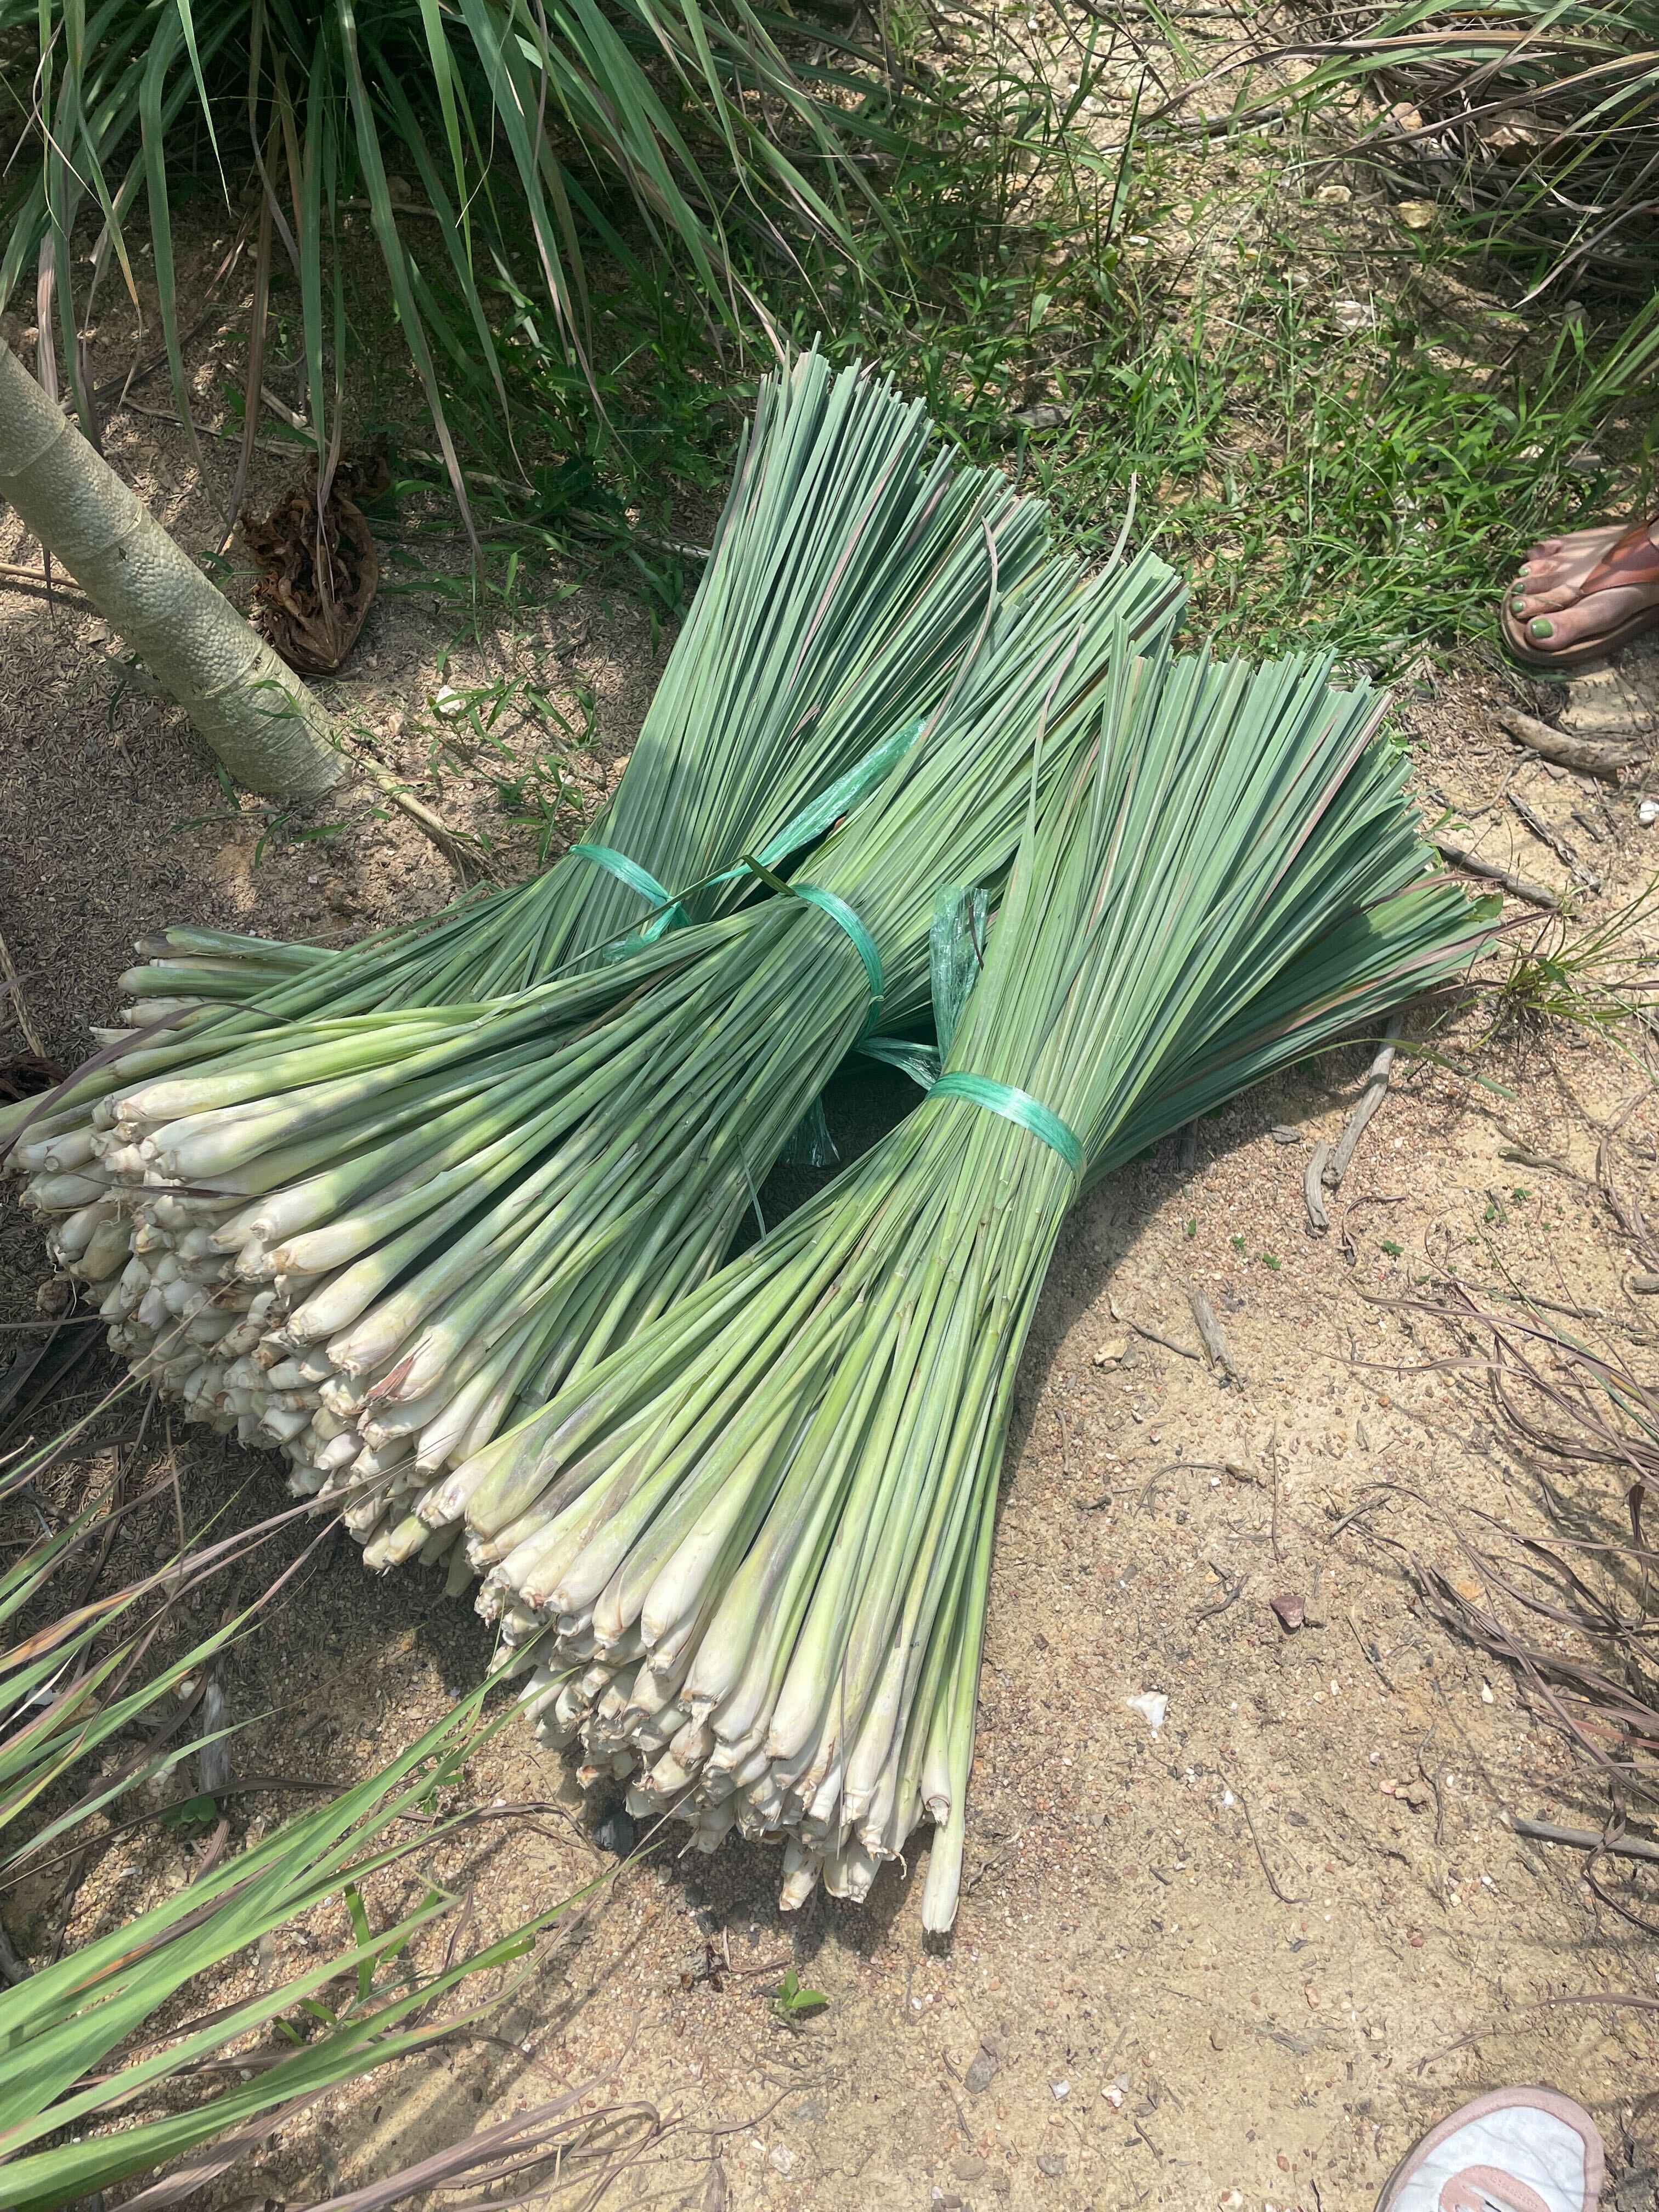 Lemongrass is one of the ingredients Rosa’s sources directly from Thailand